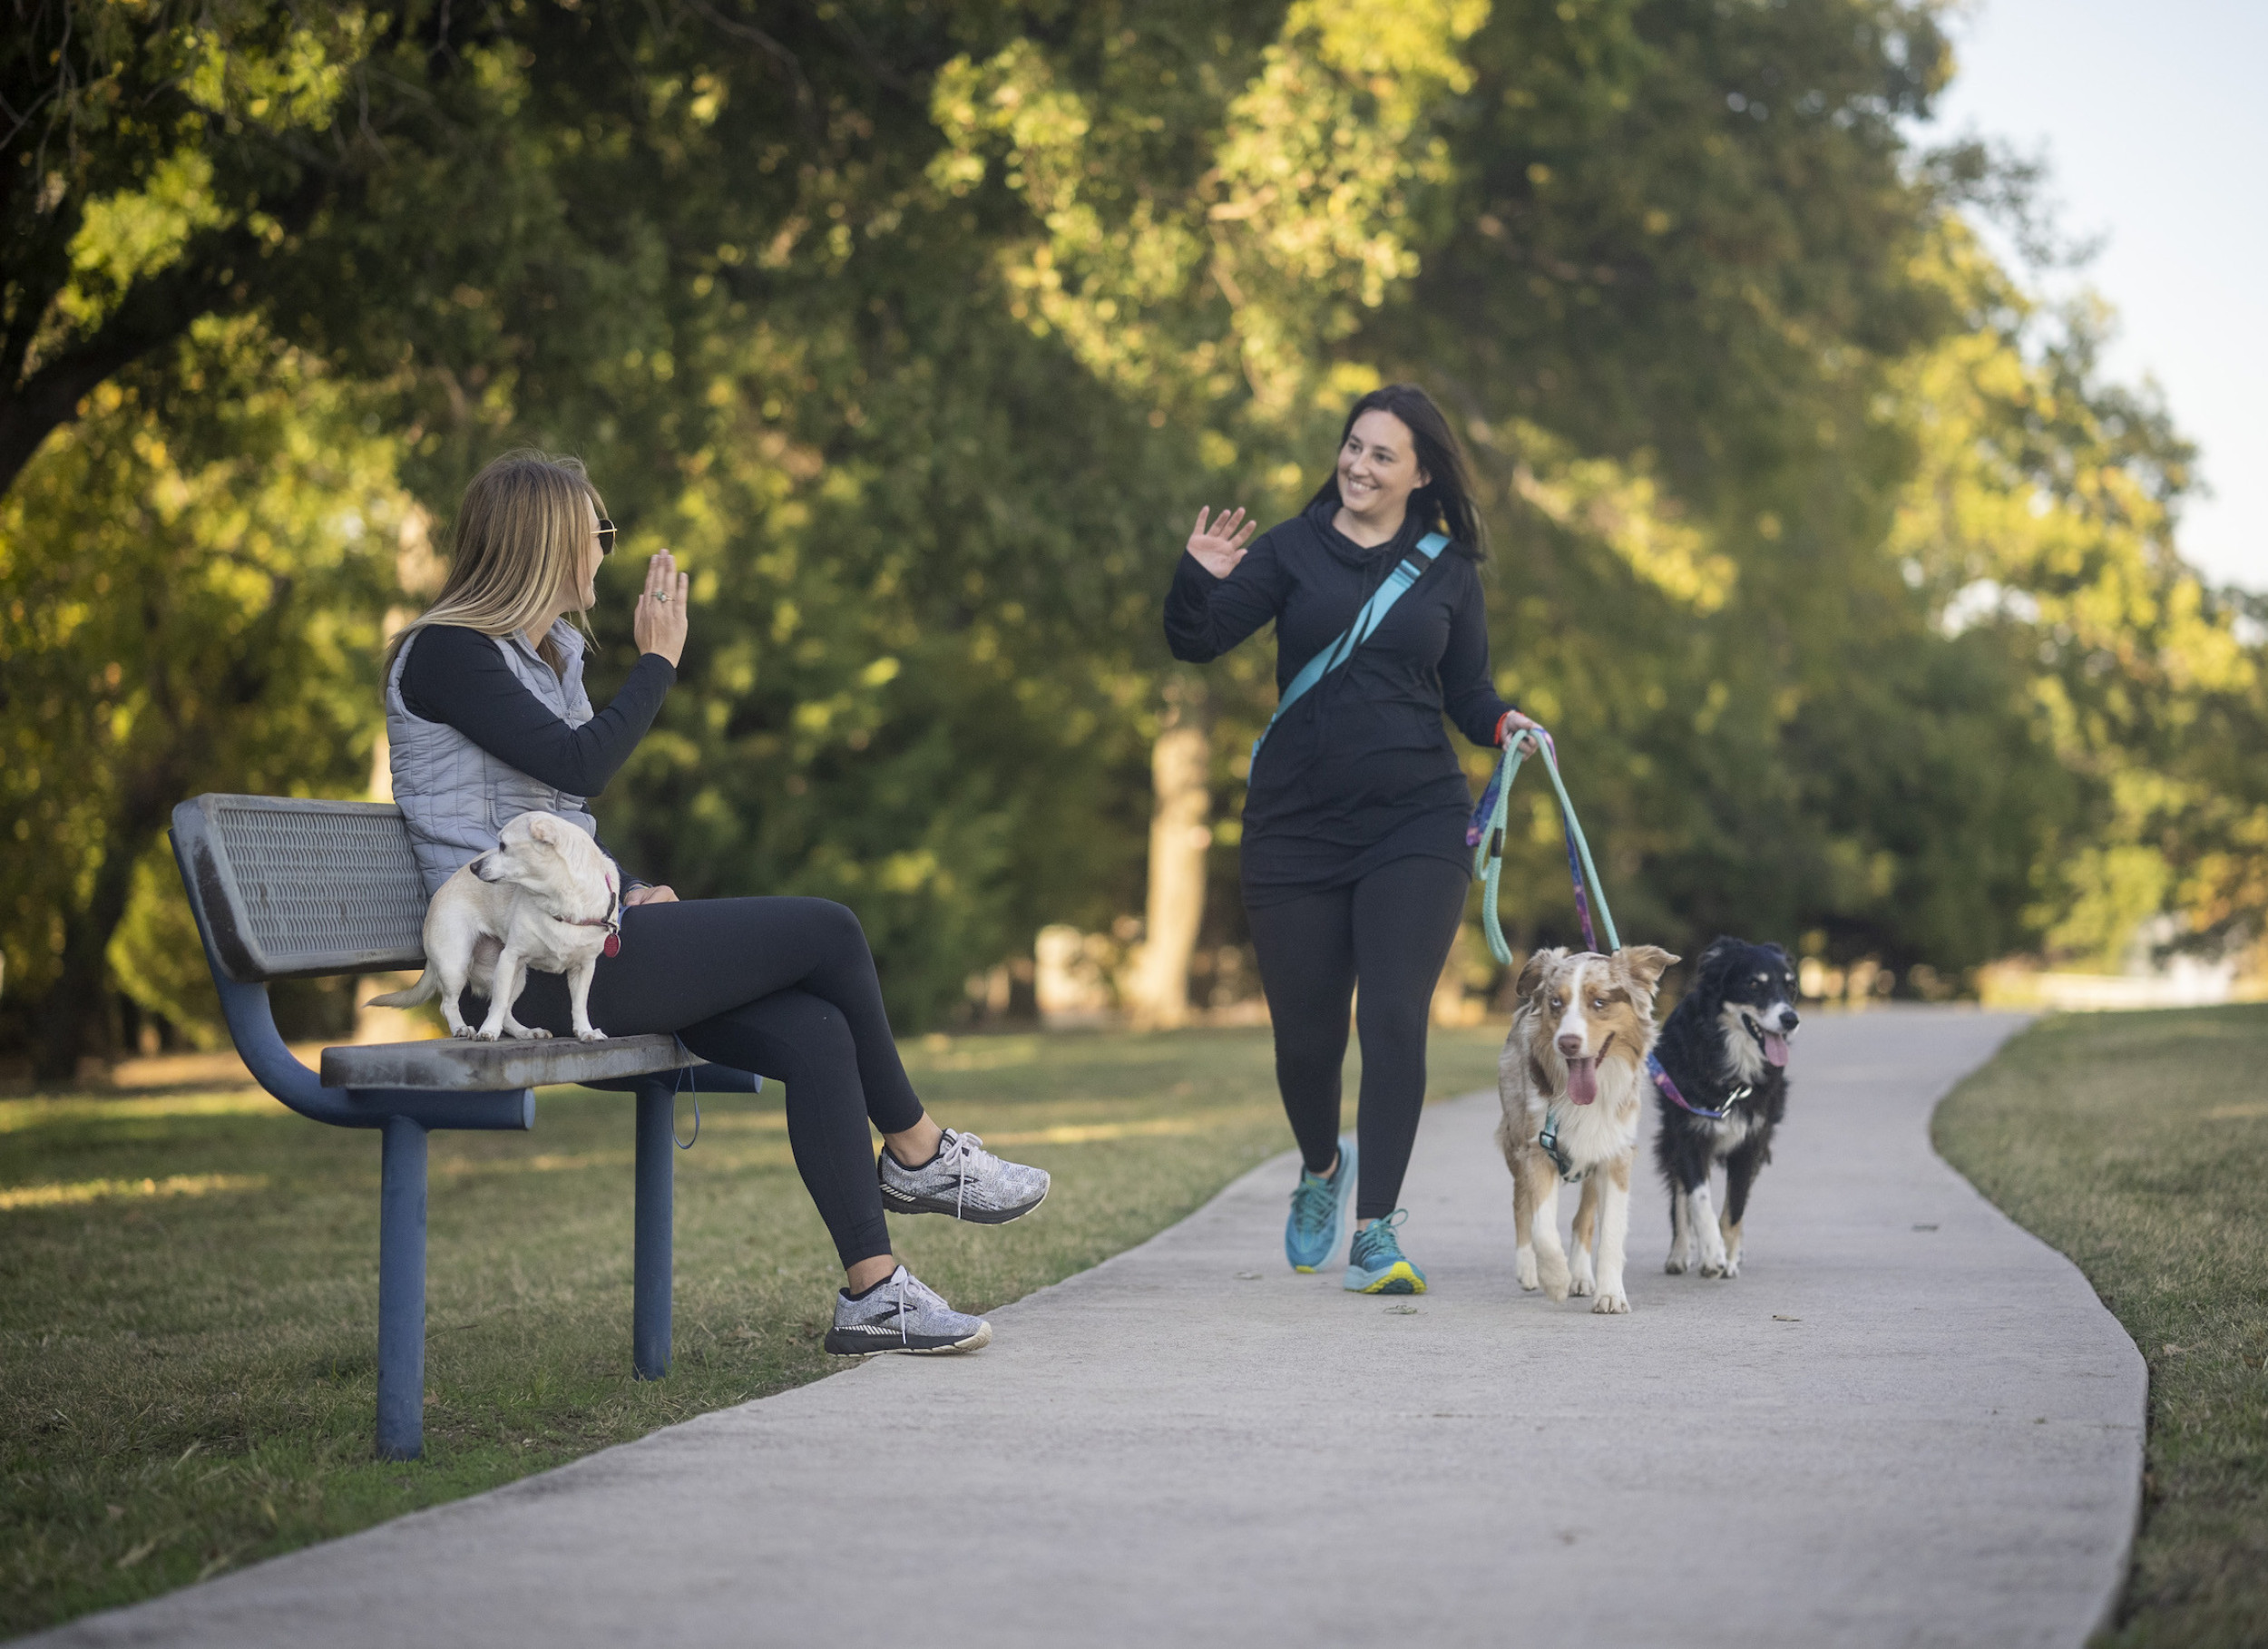 Women with dogs in a park waving at each other